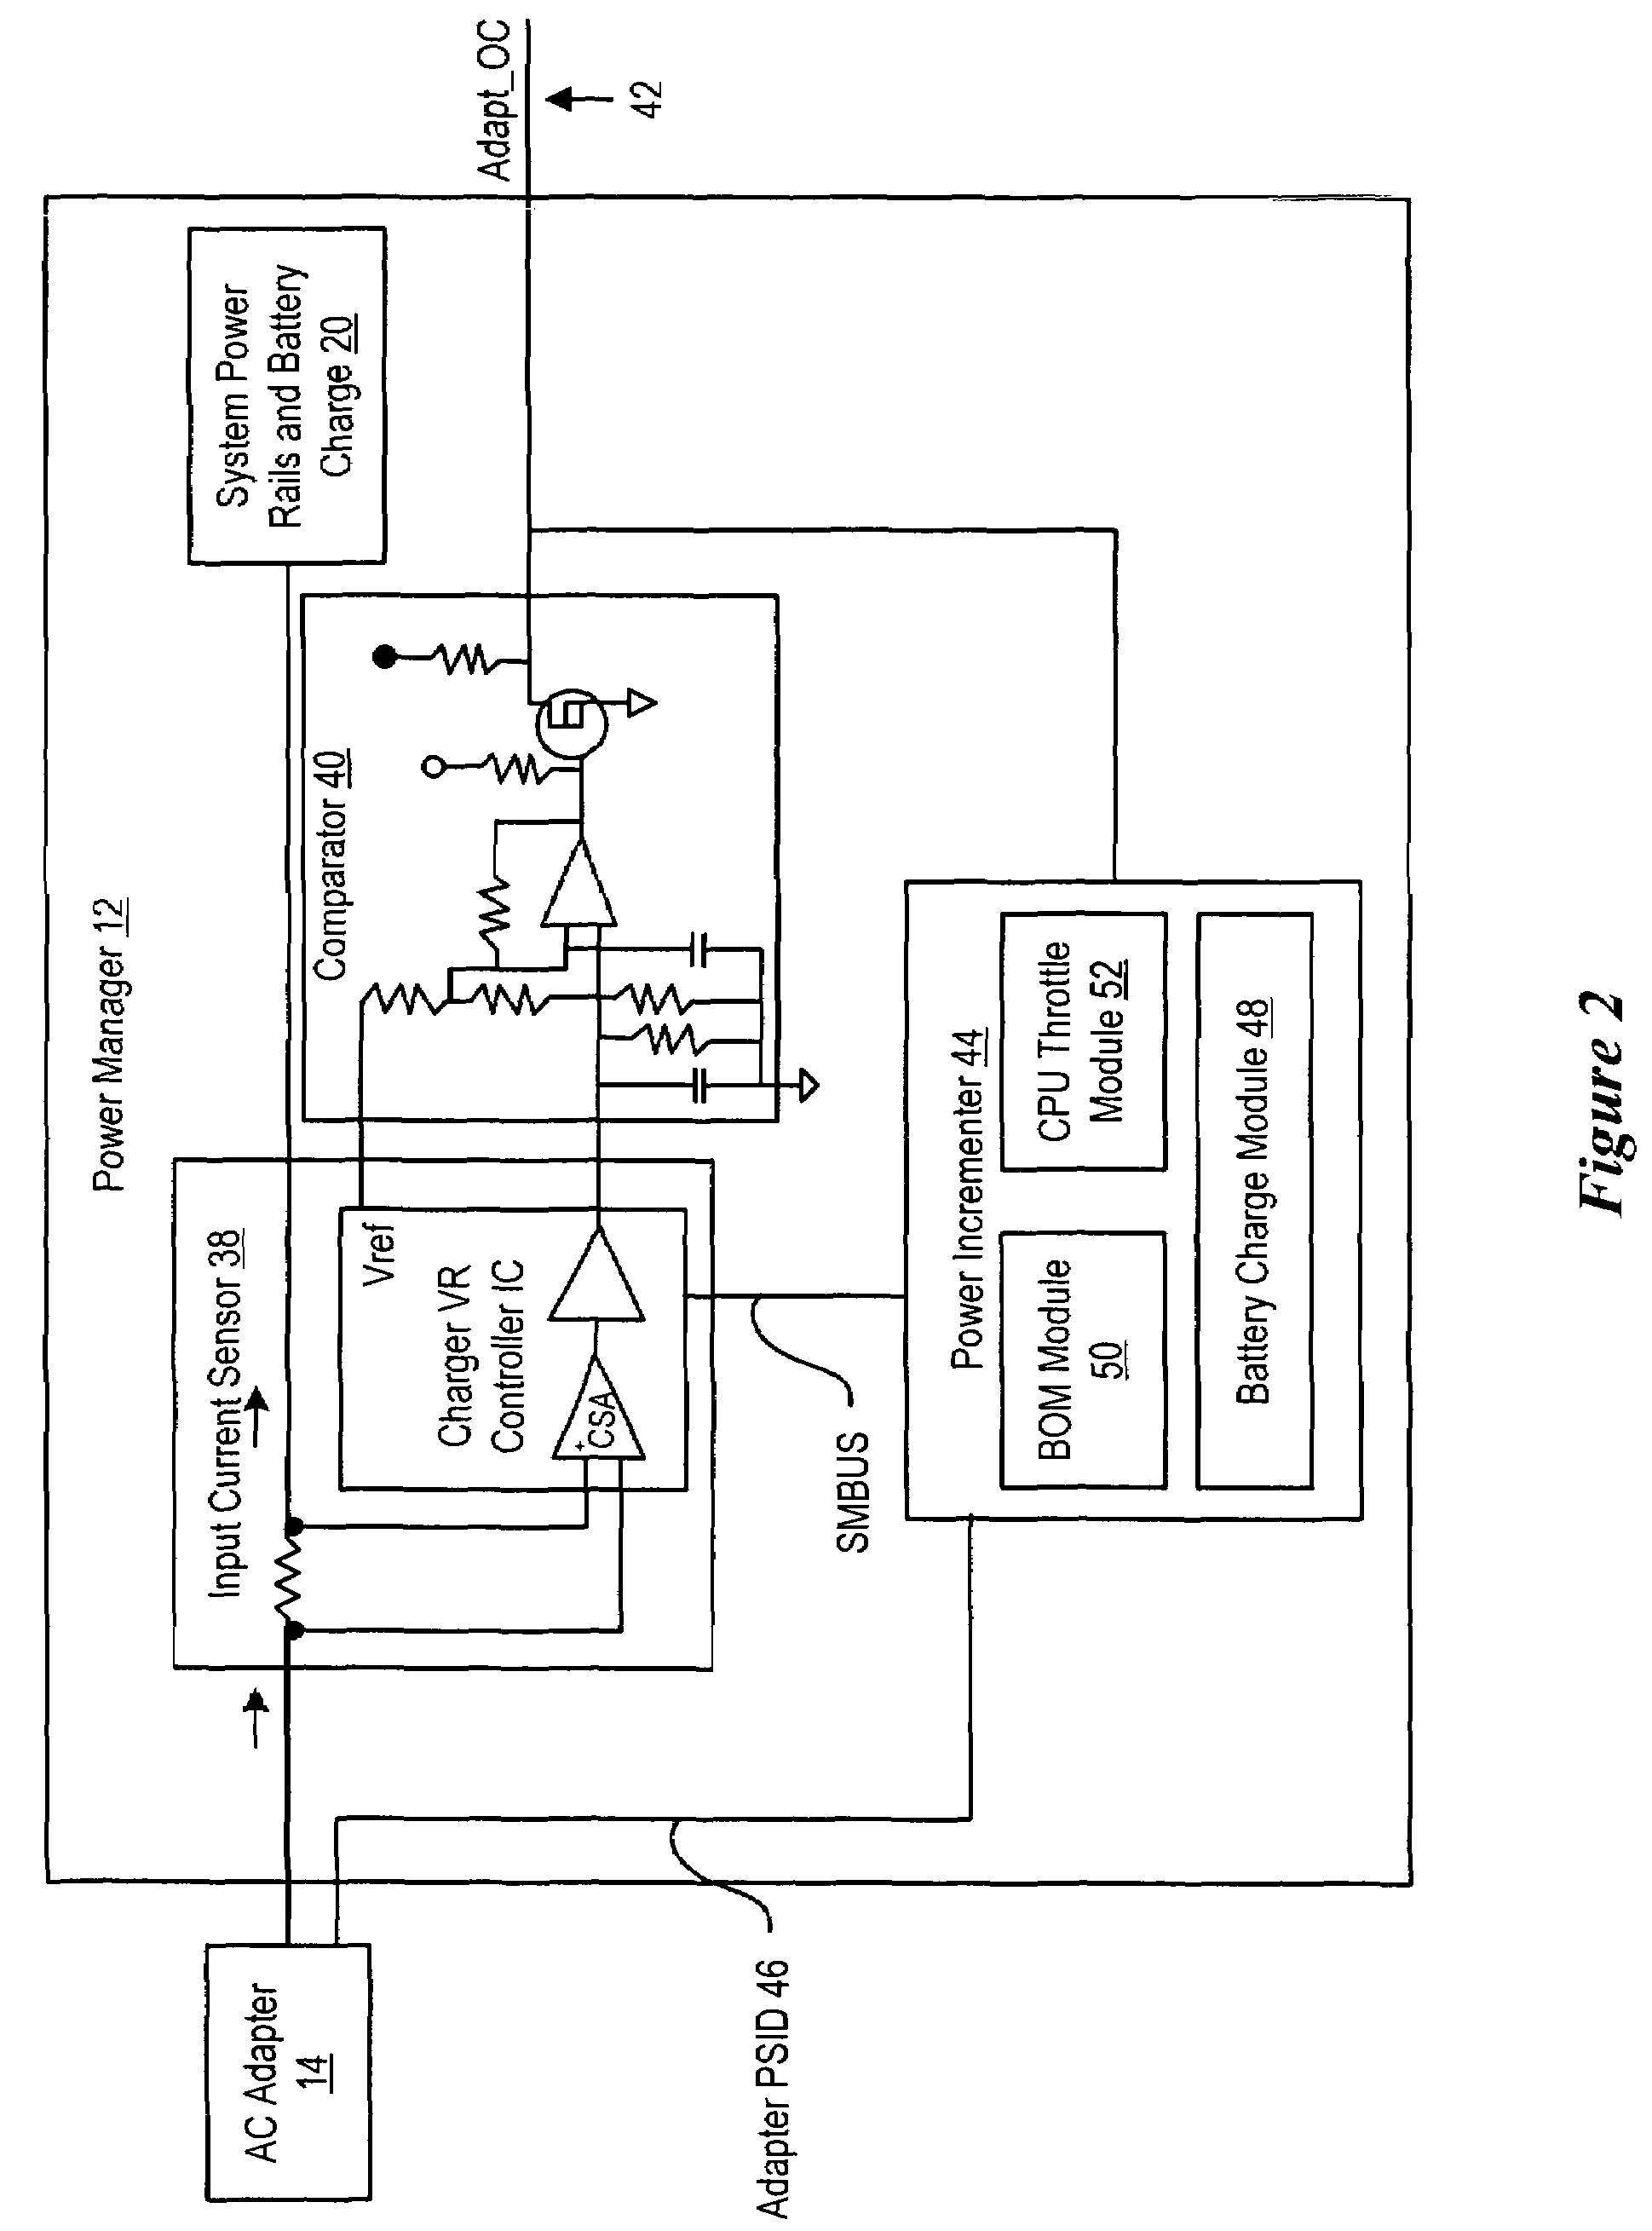 System and method for managing power provided to a portable information handling system